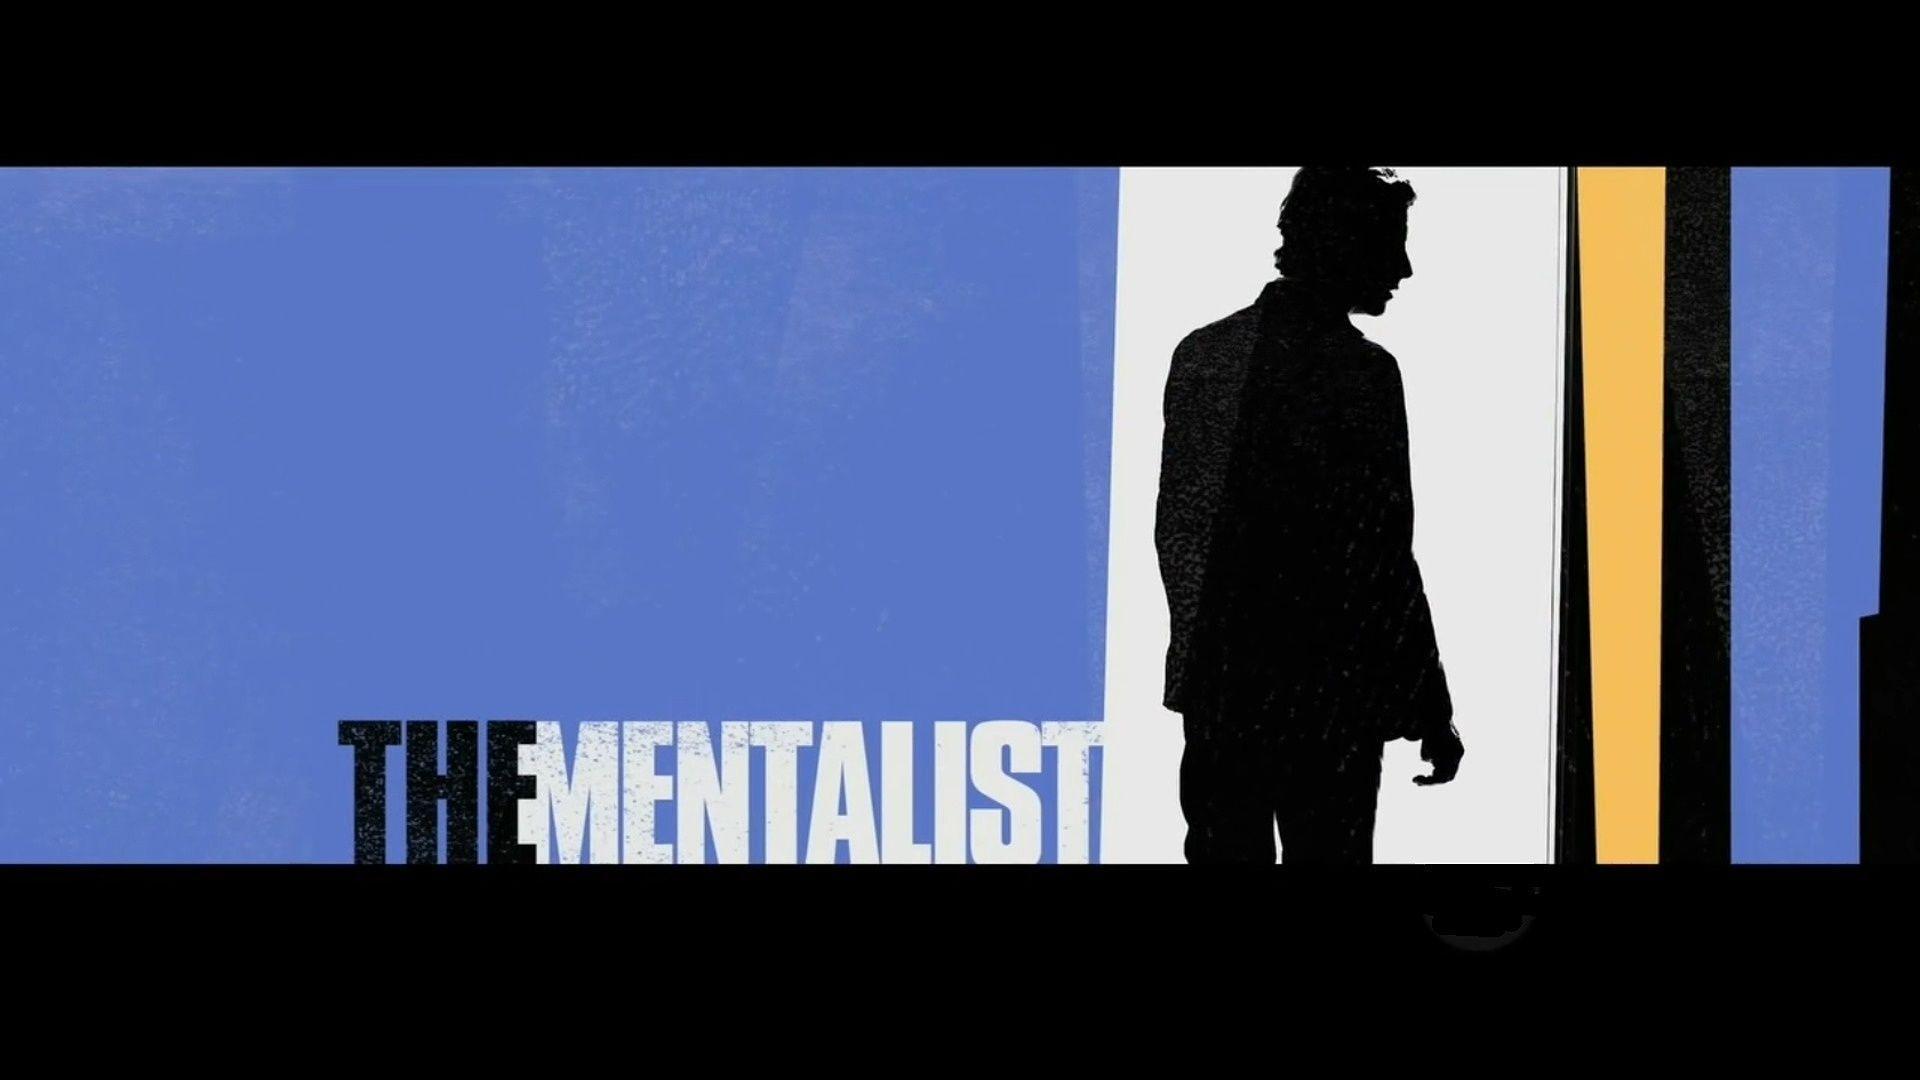 The Mentalist Wallpaper. The Mentalist Background